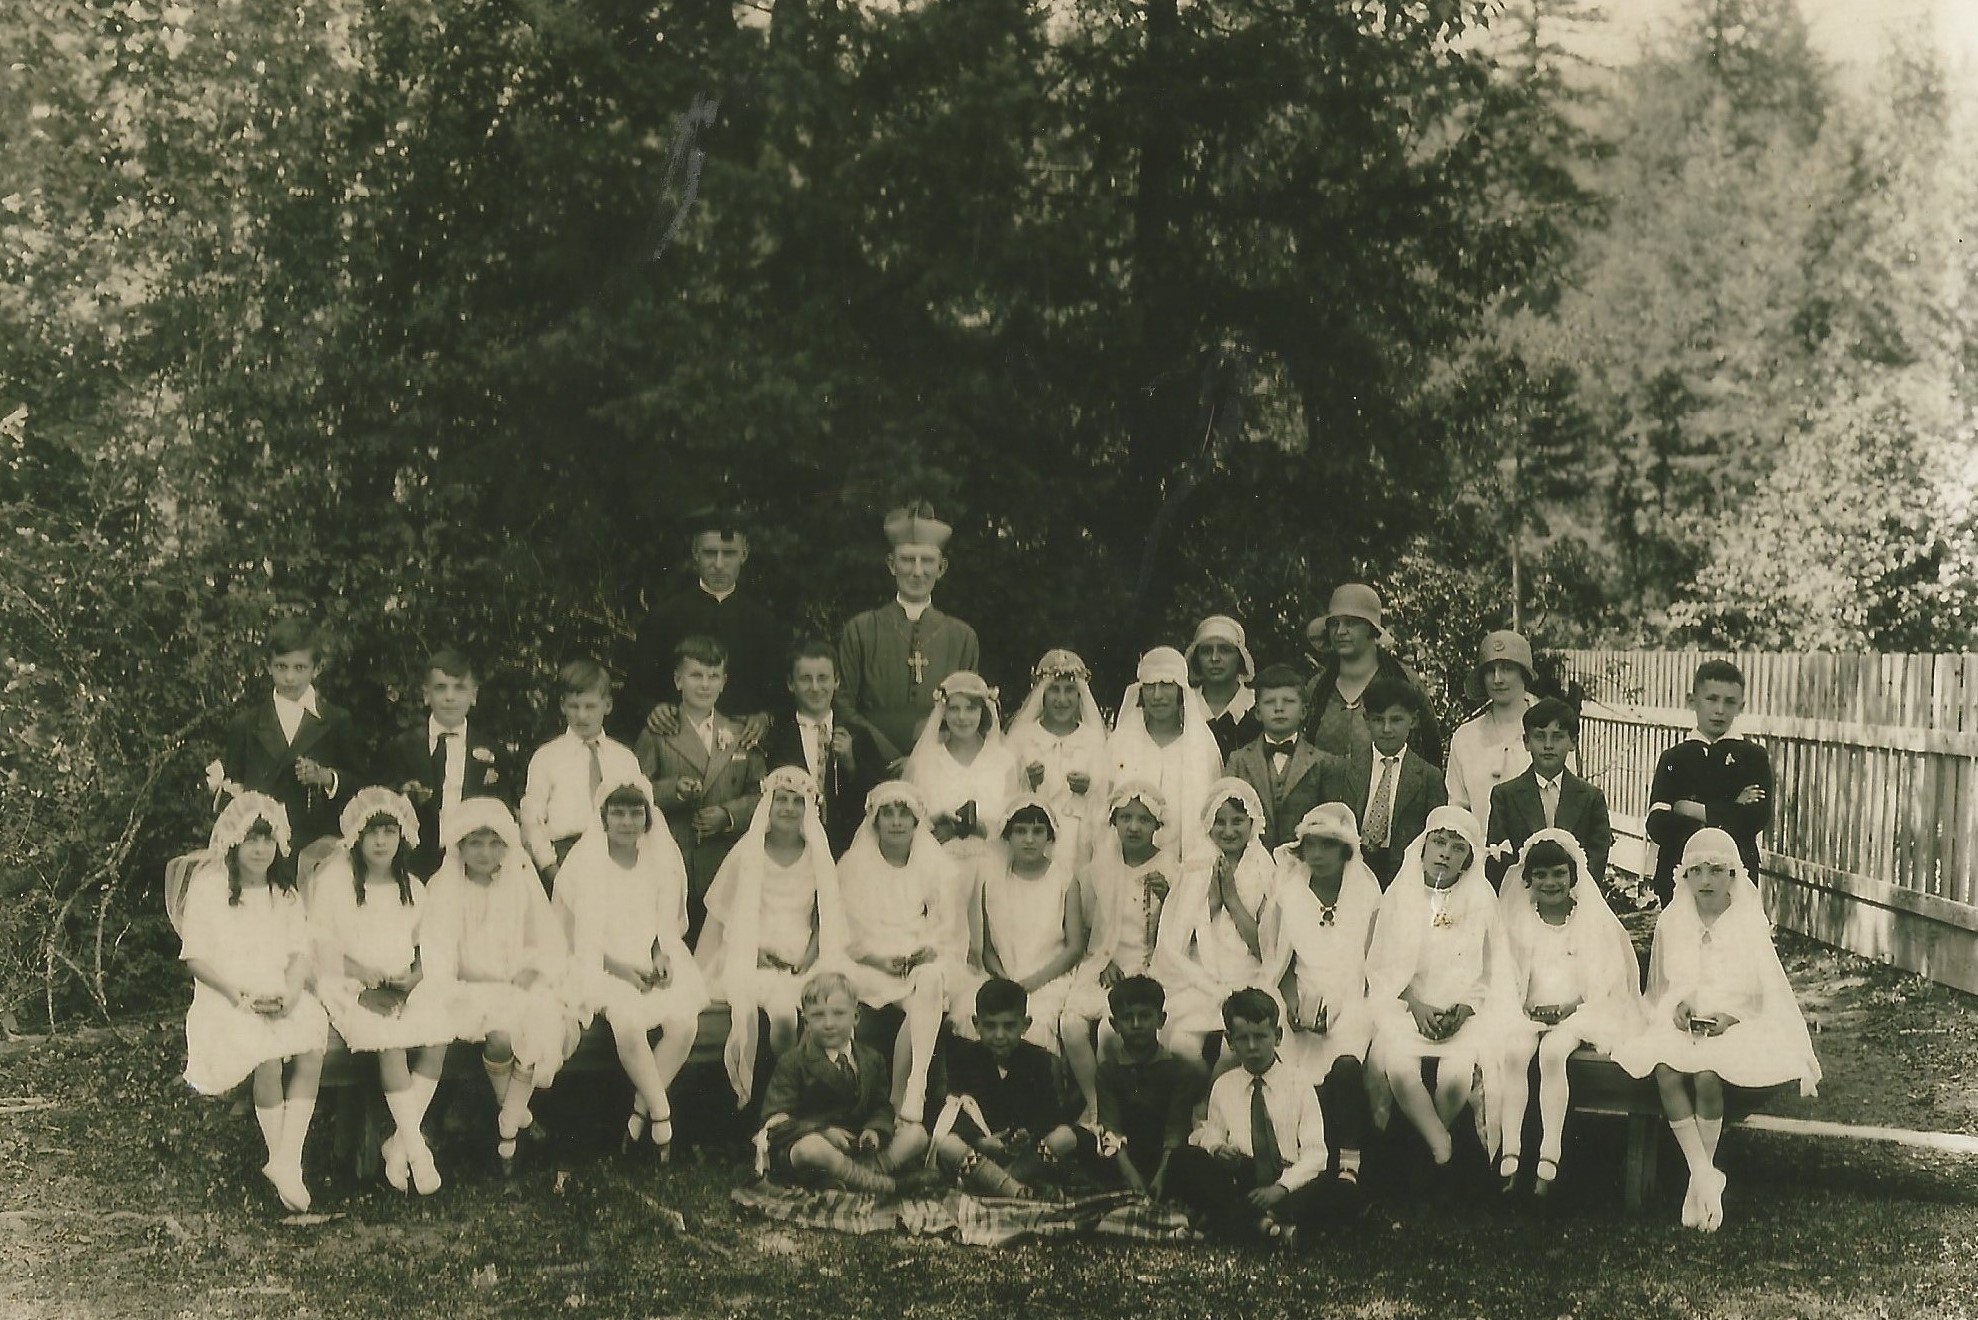 A large group of children are gathered in front of two priests. All of the young girls are wearing white dresses, white stockings, a white headdress and veil. The boys are wearing a suit and tie. Two women stand in the background.